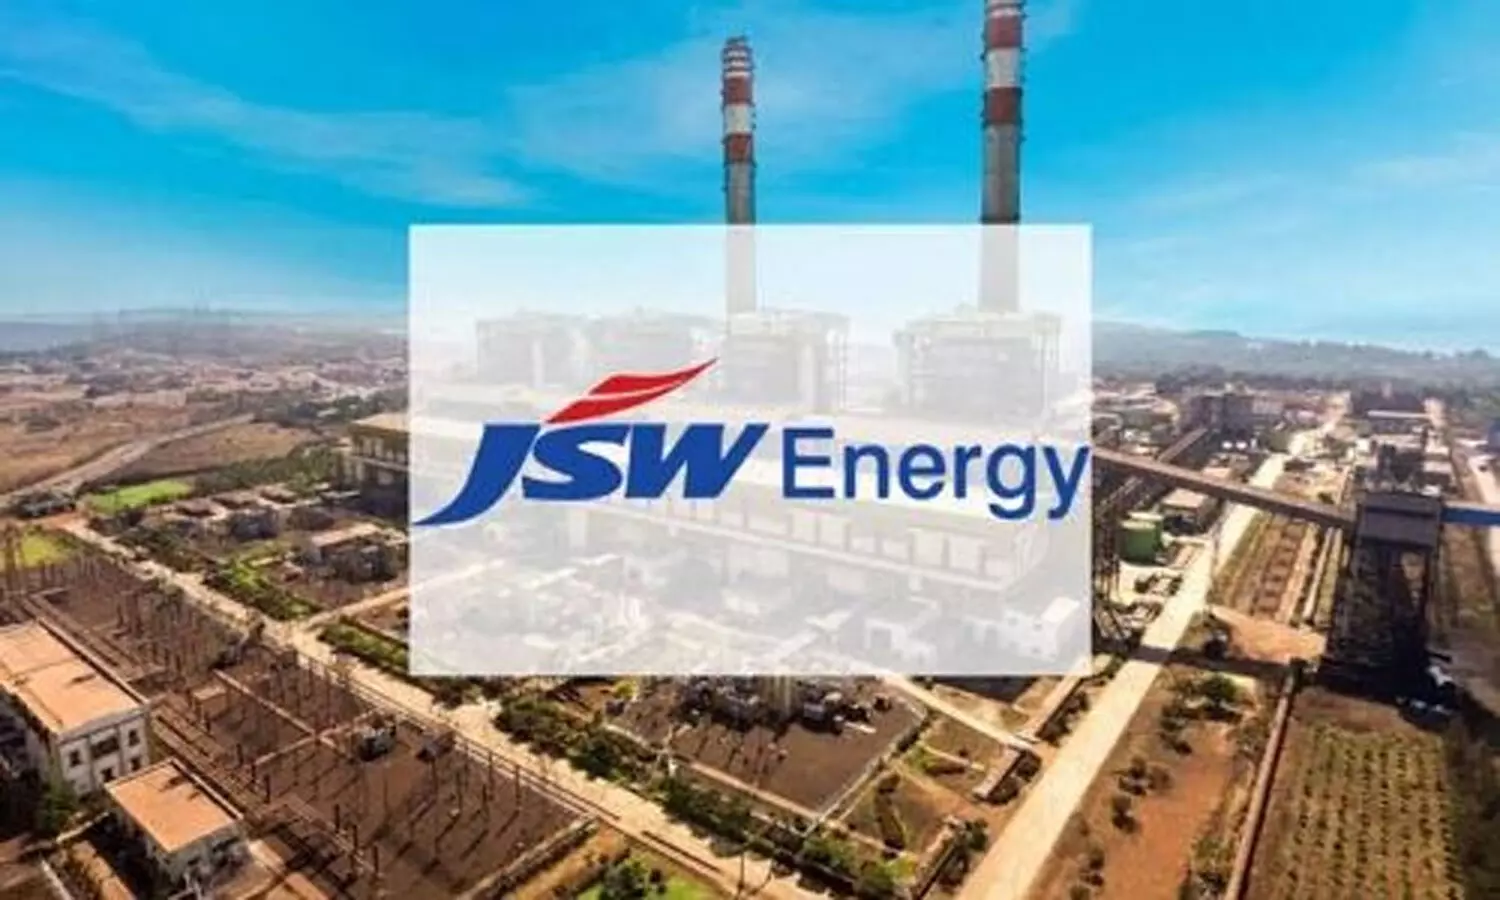 JSW Neo Energy to invest Rs 8,104 crore in hydro power project in YSR Kadapa